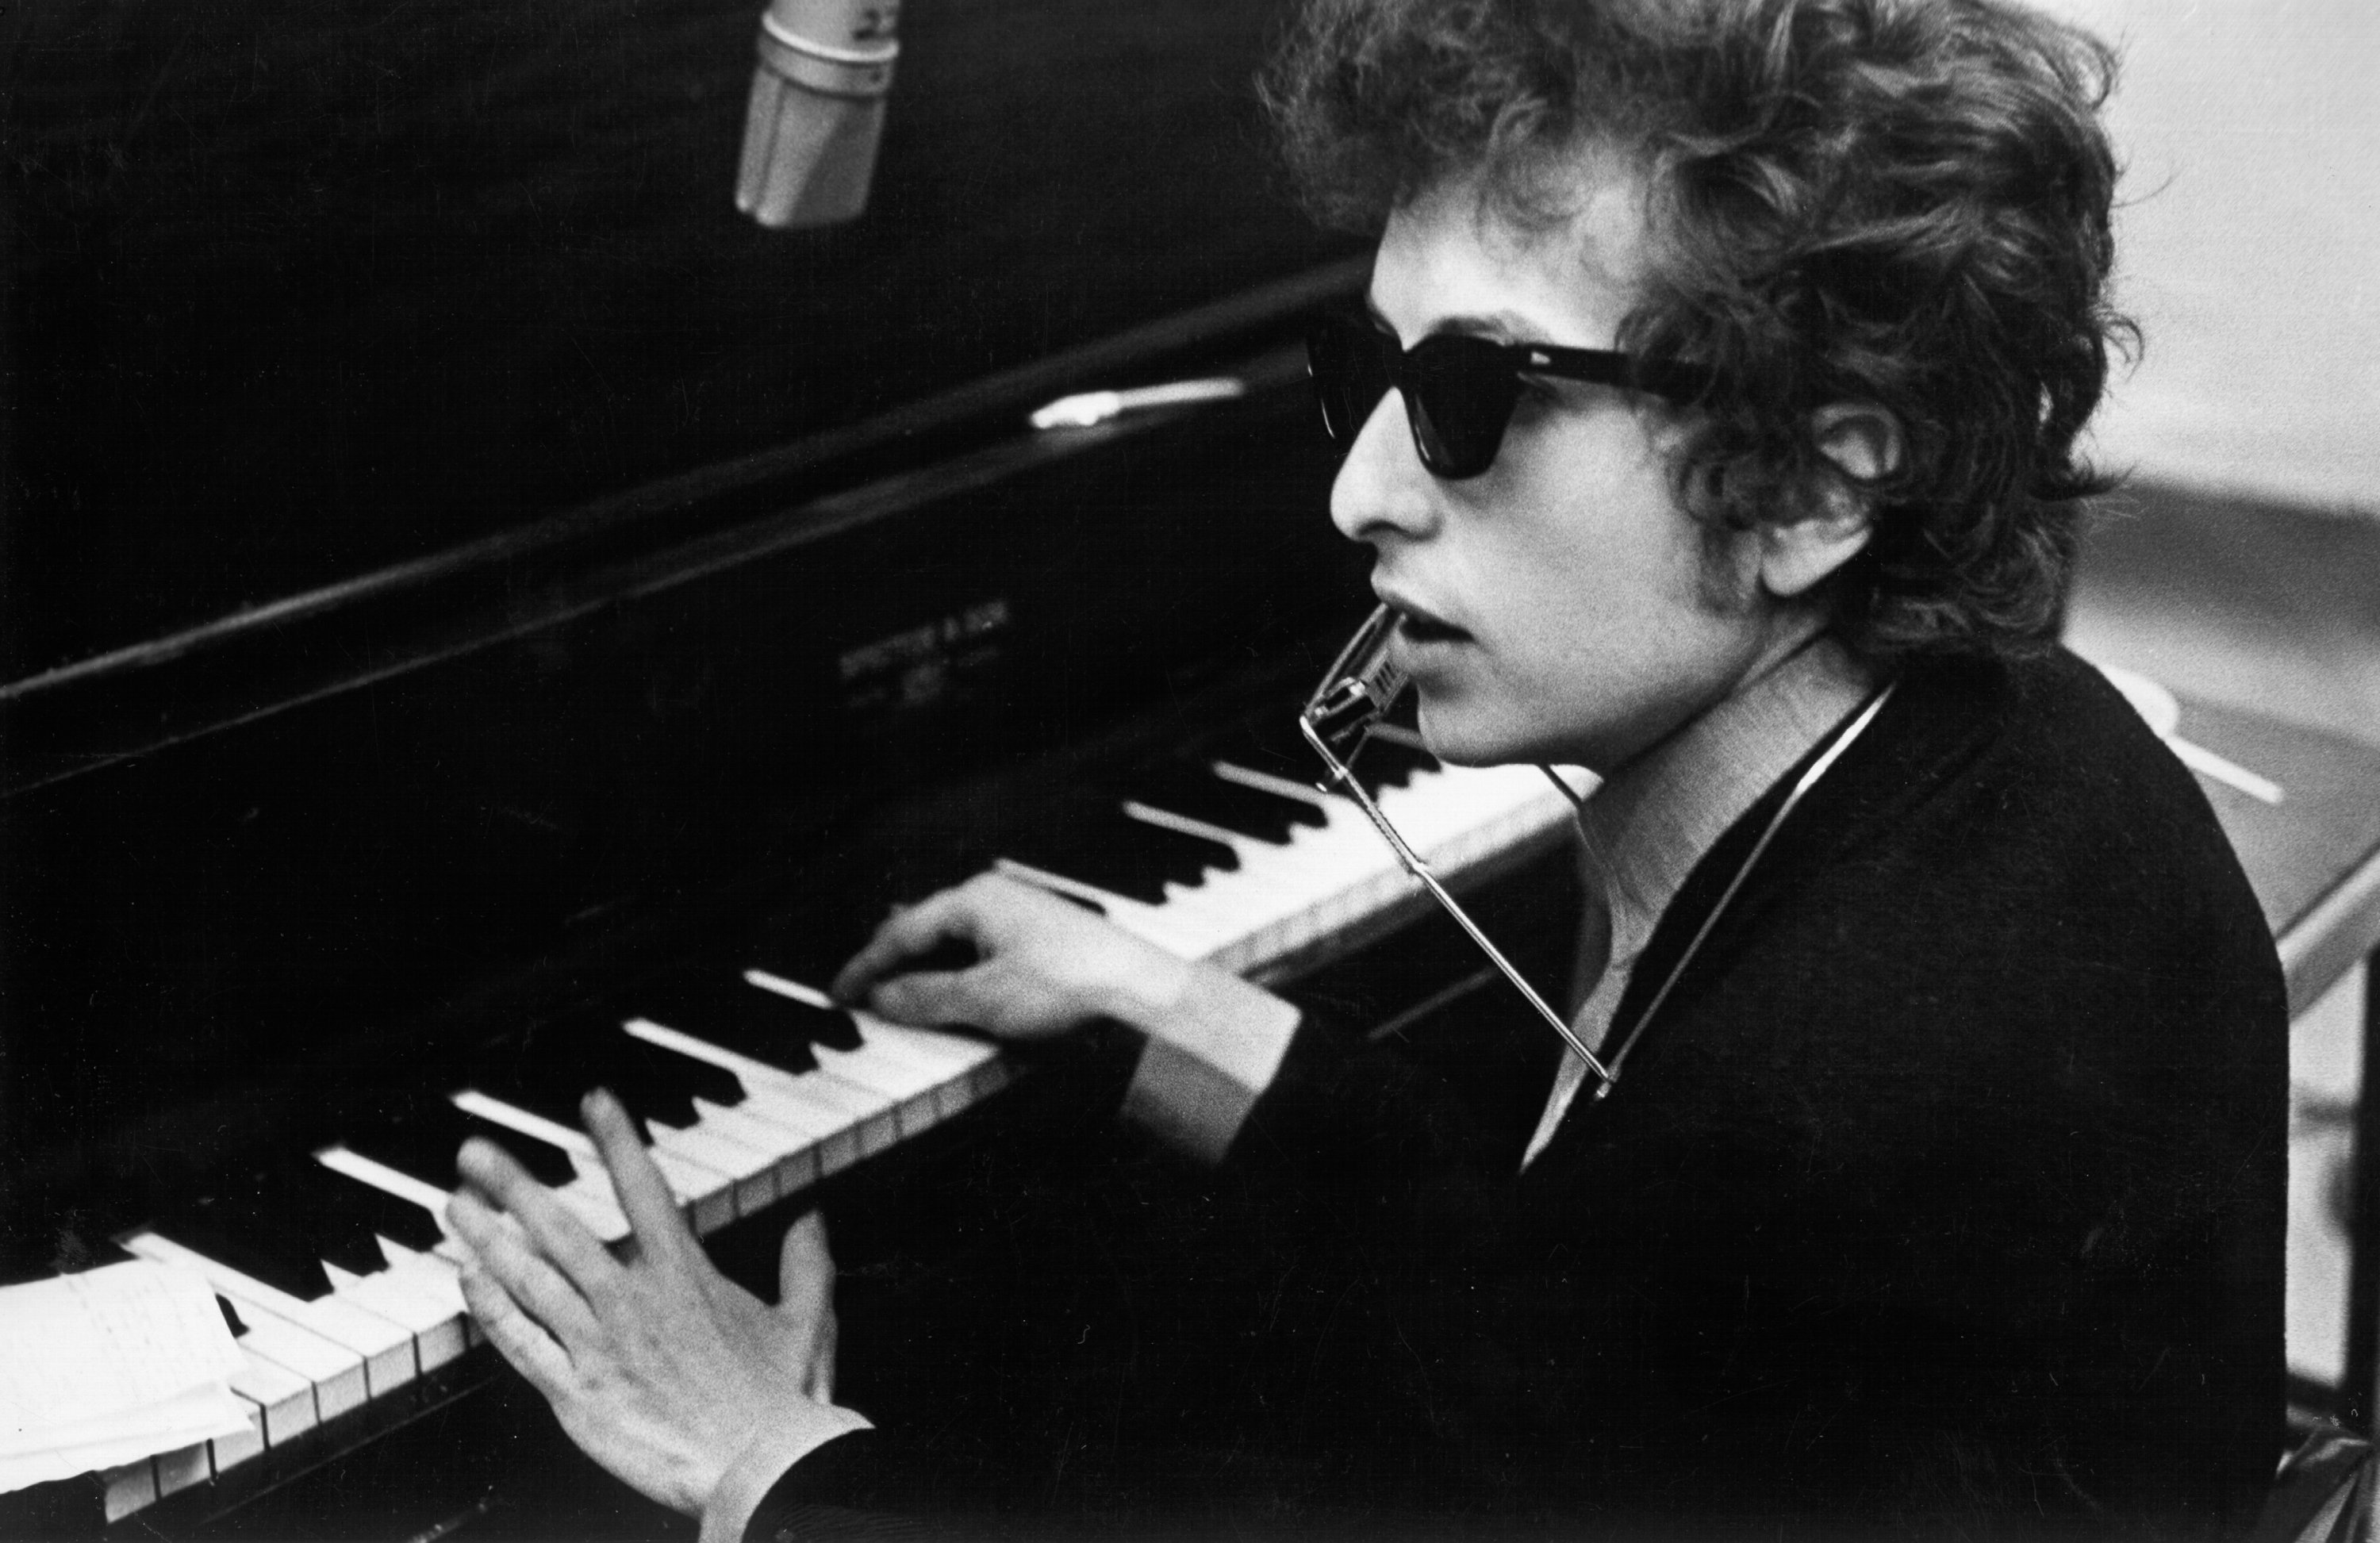 A black and white picture of Bob Dylan wearing sunglasses and sitting at a piano in 1965, the year before his motorcycle crash.